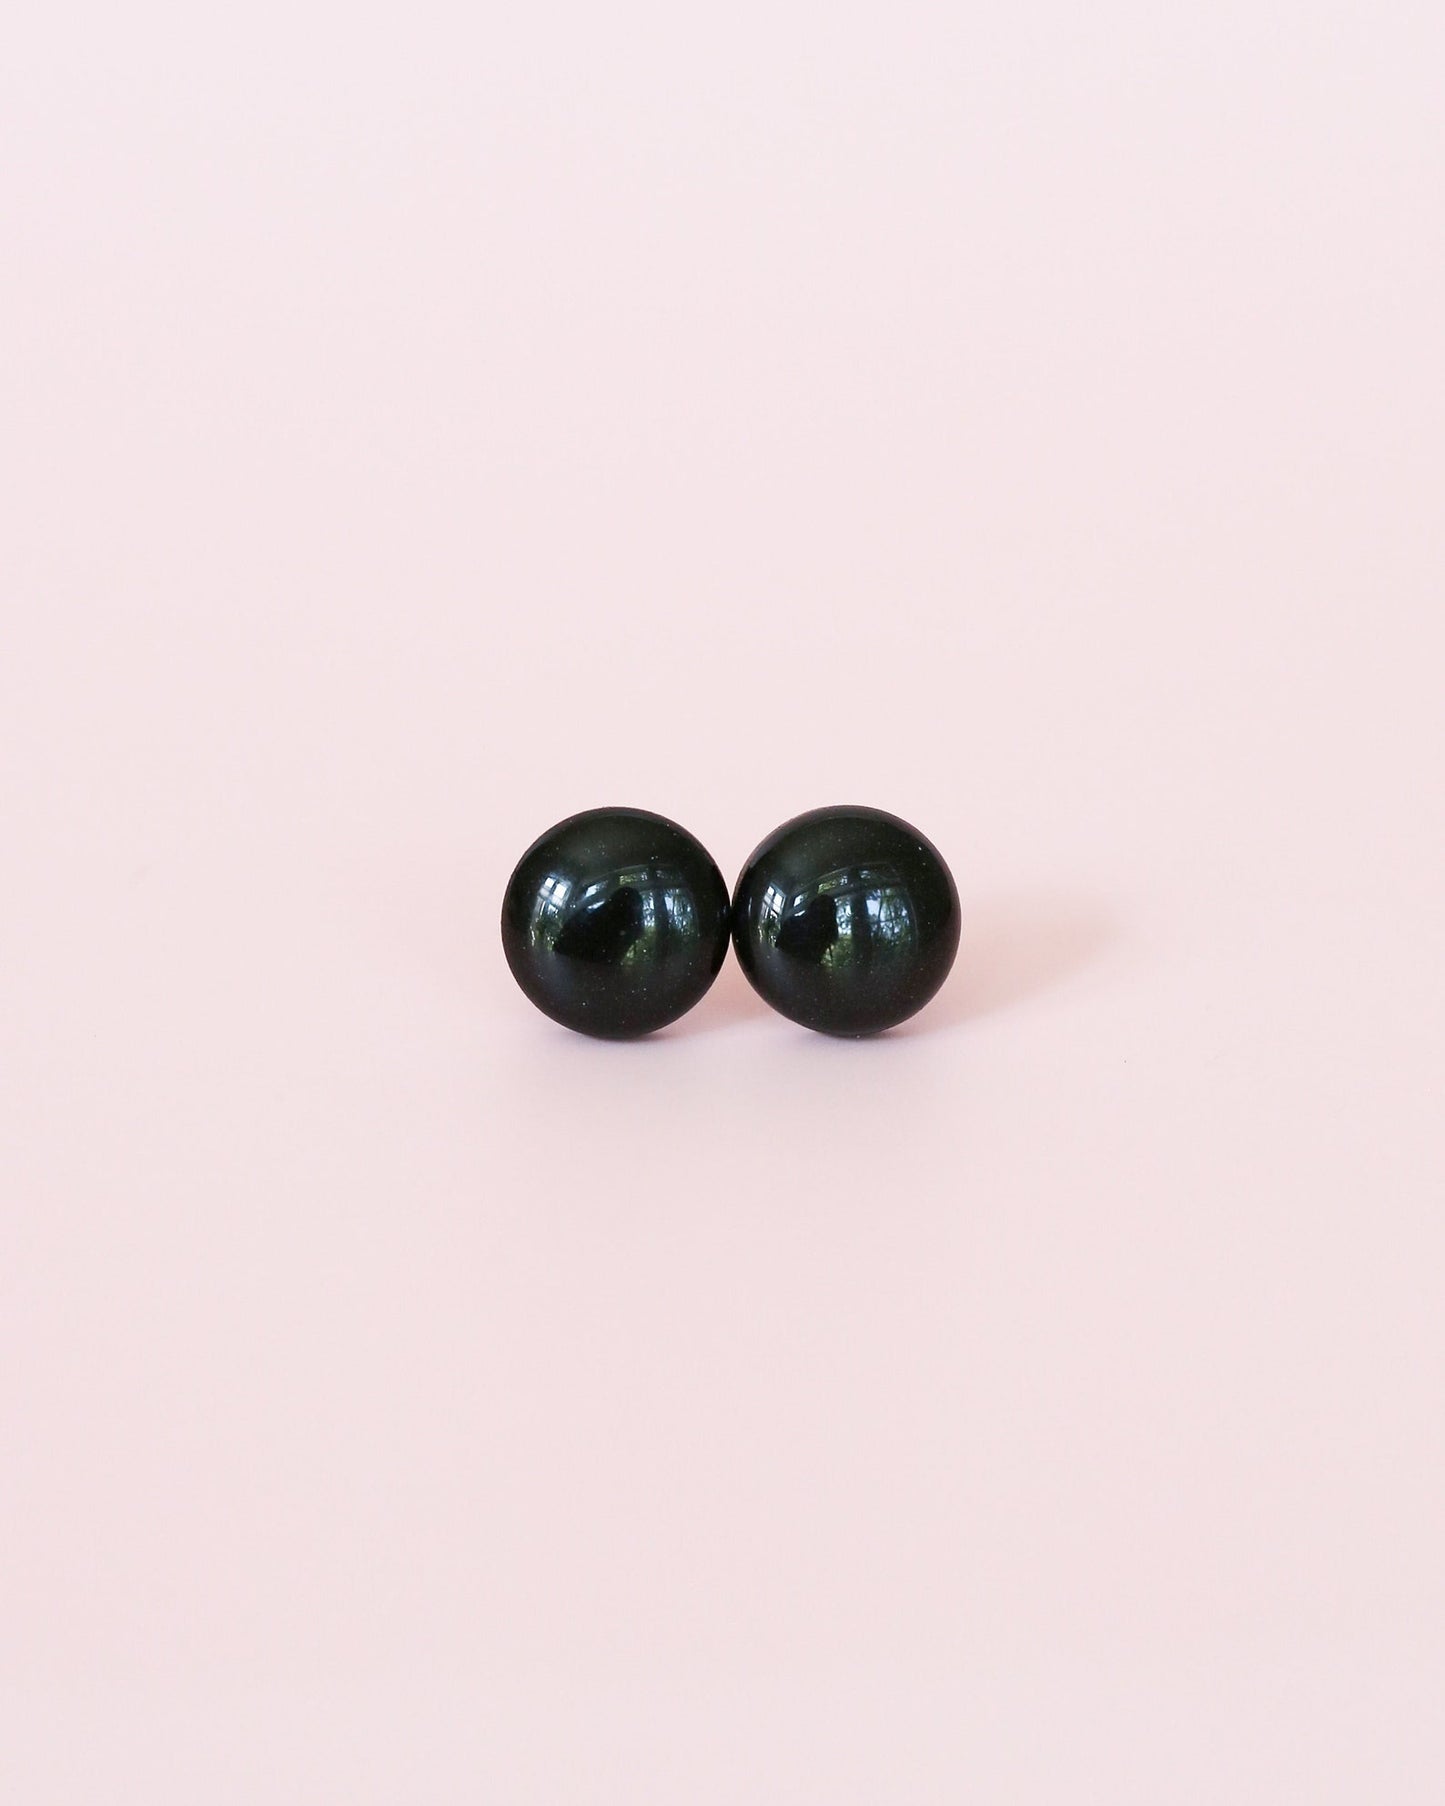 Simple black round studs for sensitive ears